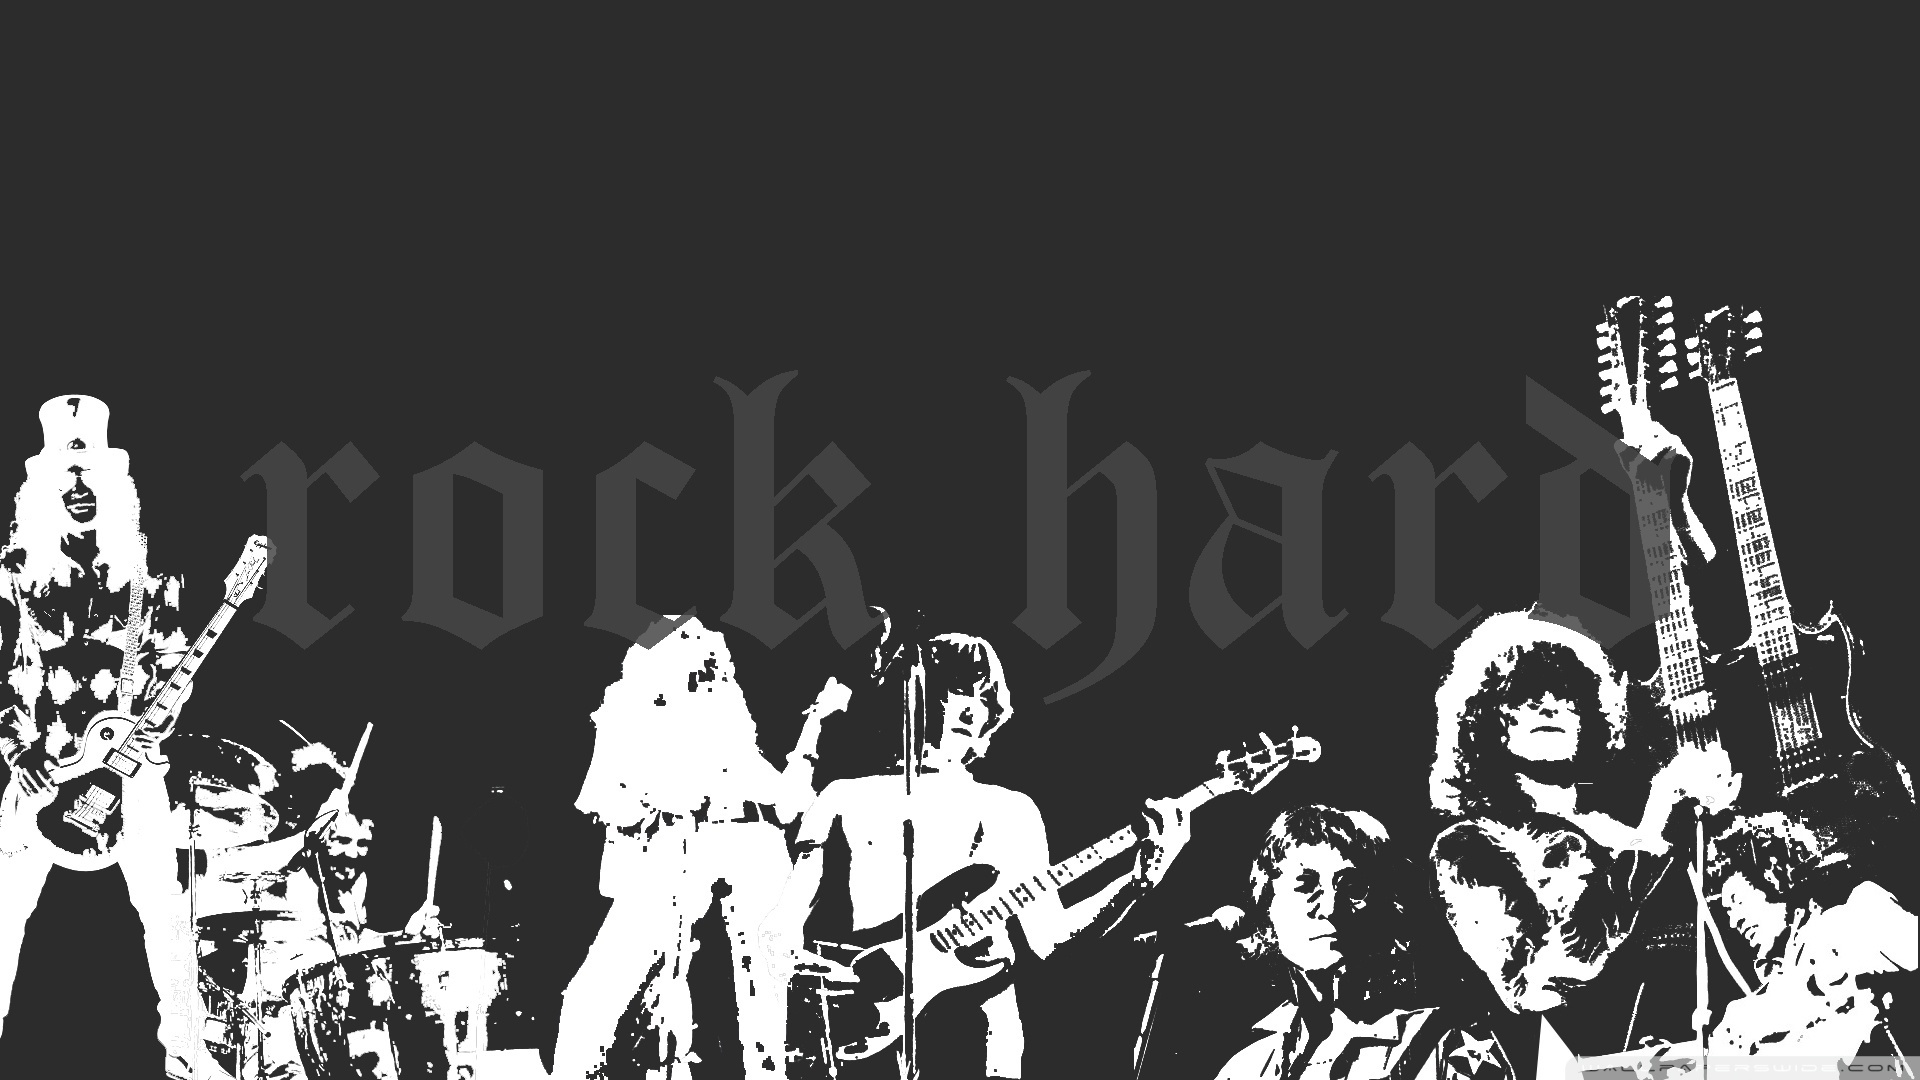 Hard rock wallpapers, Popular choices, Captivating screens, Rock-inspired backgrounds, 1920x1080 Full HD Desktop